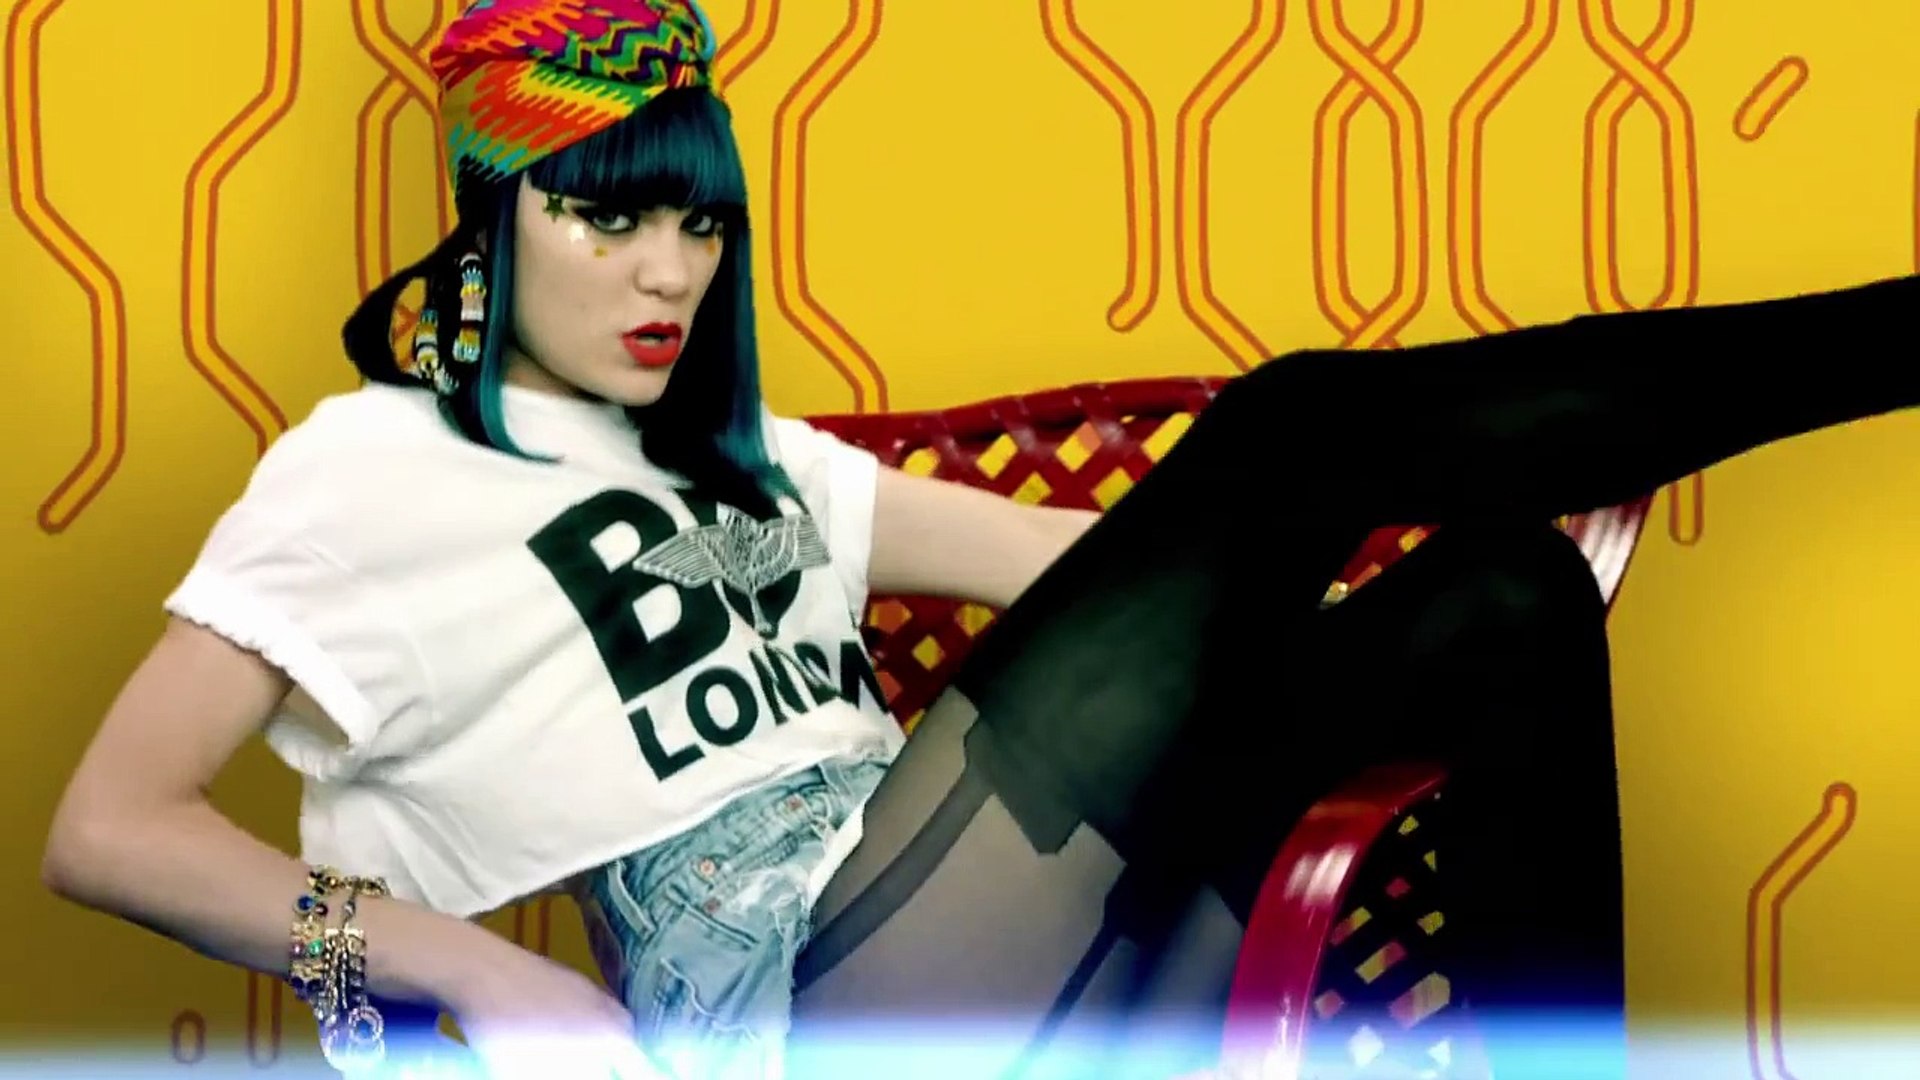 today I wash my clothes Engineers Jessie J Domino - video Dailymotion